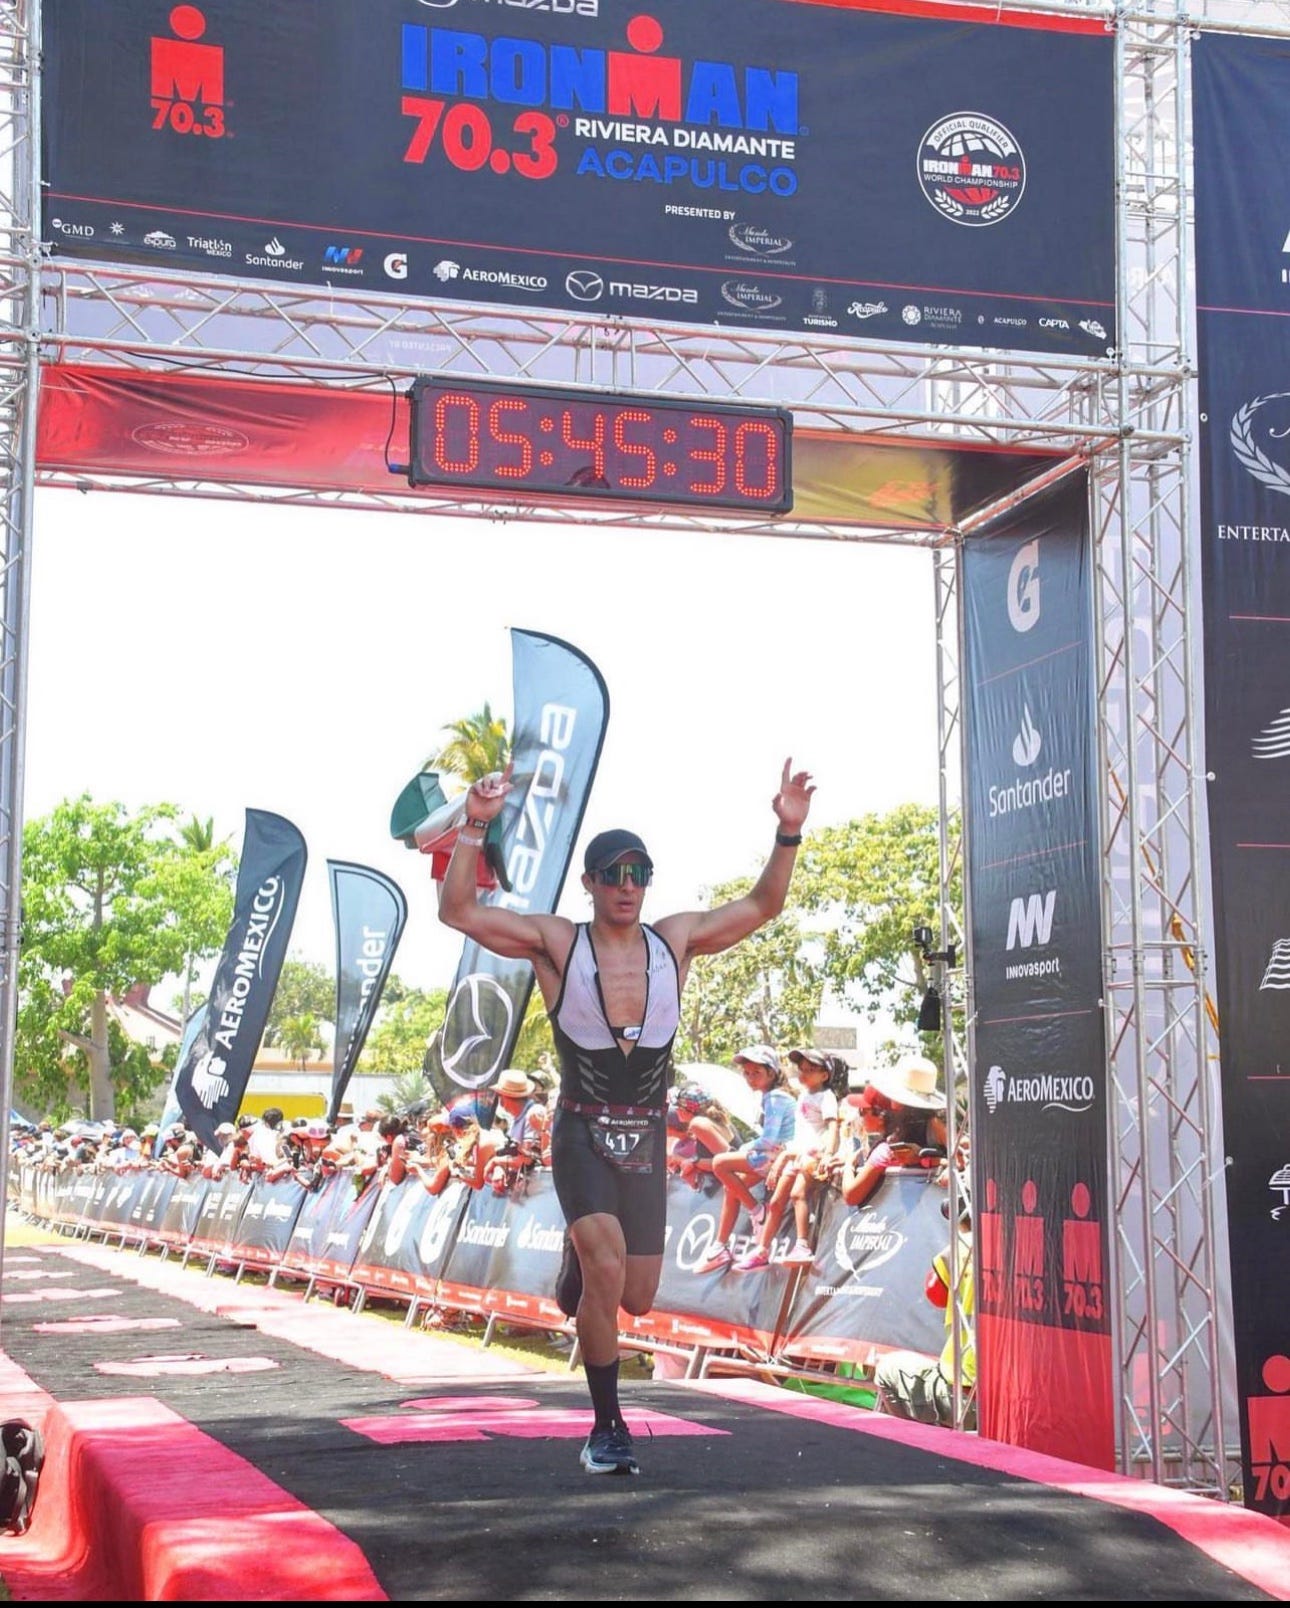 Ironman 70.3 is back this weekend